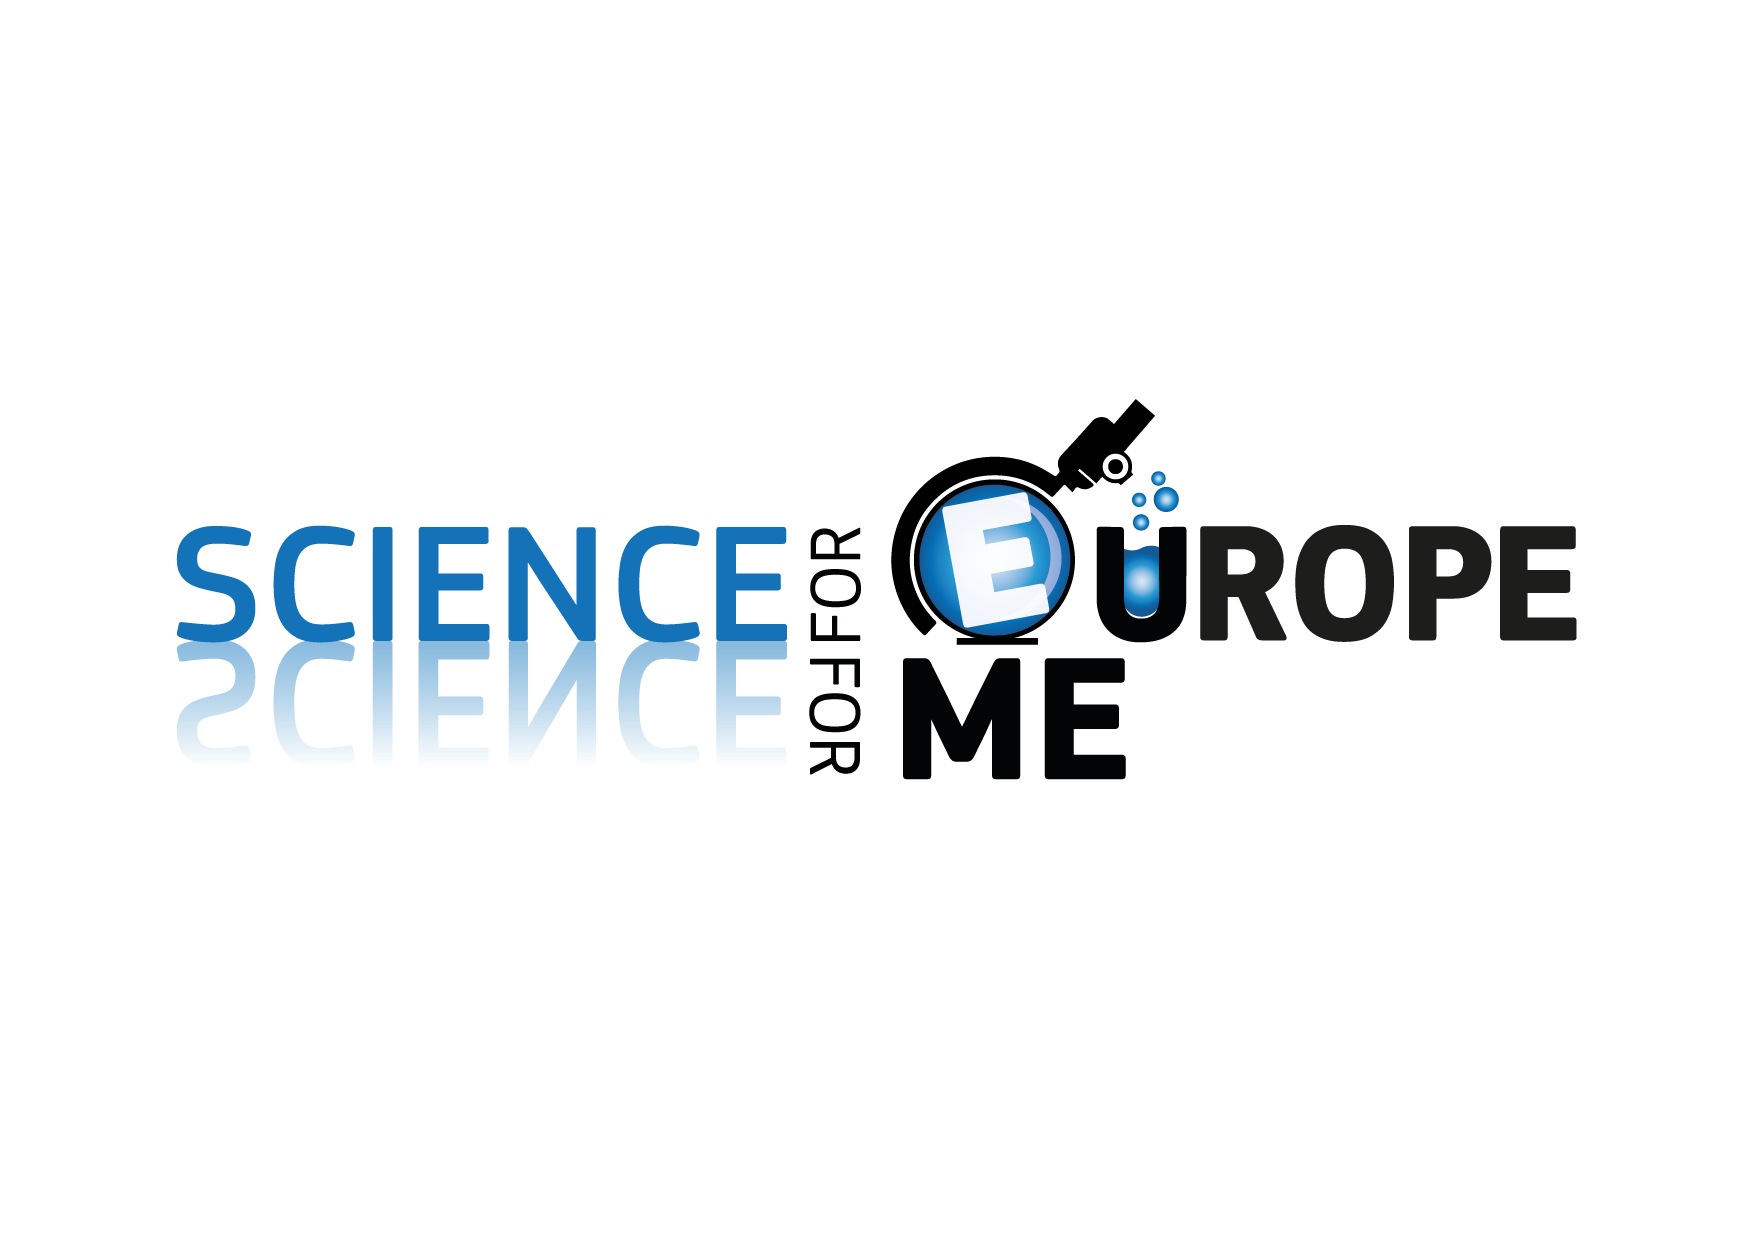 Science for Europe, Science for Me